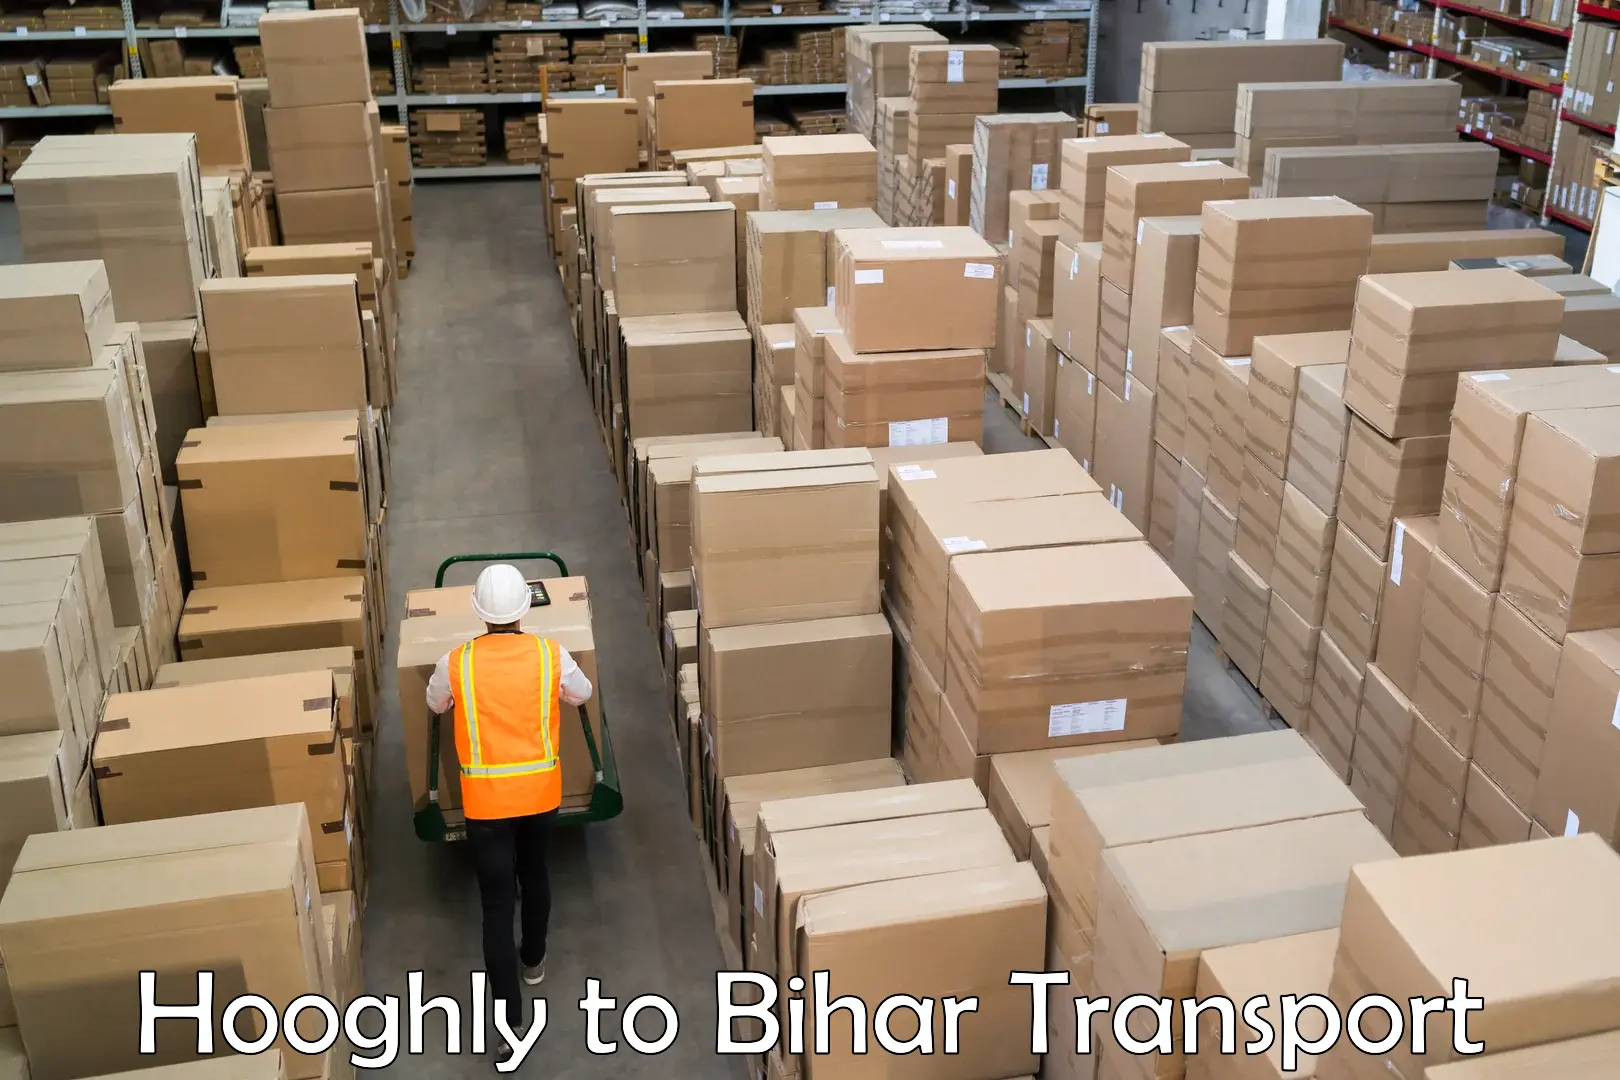 Parcel transport services Hooghly to Bhagalpur